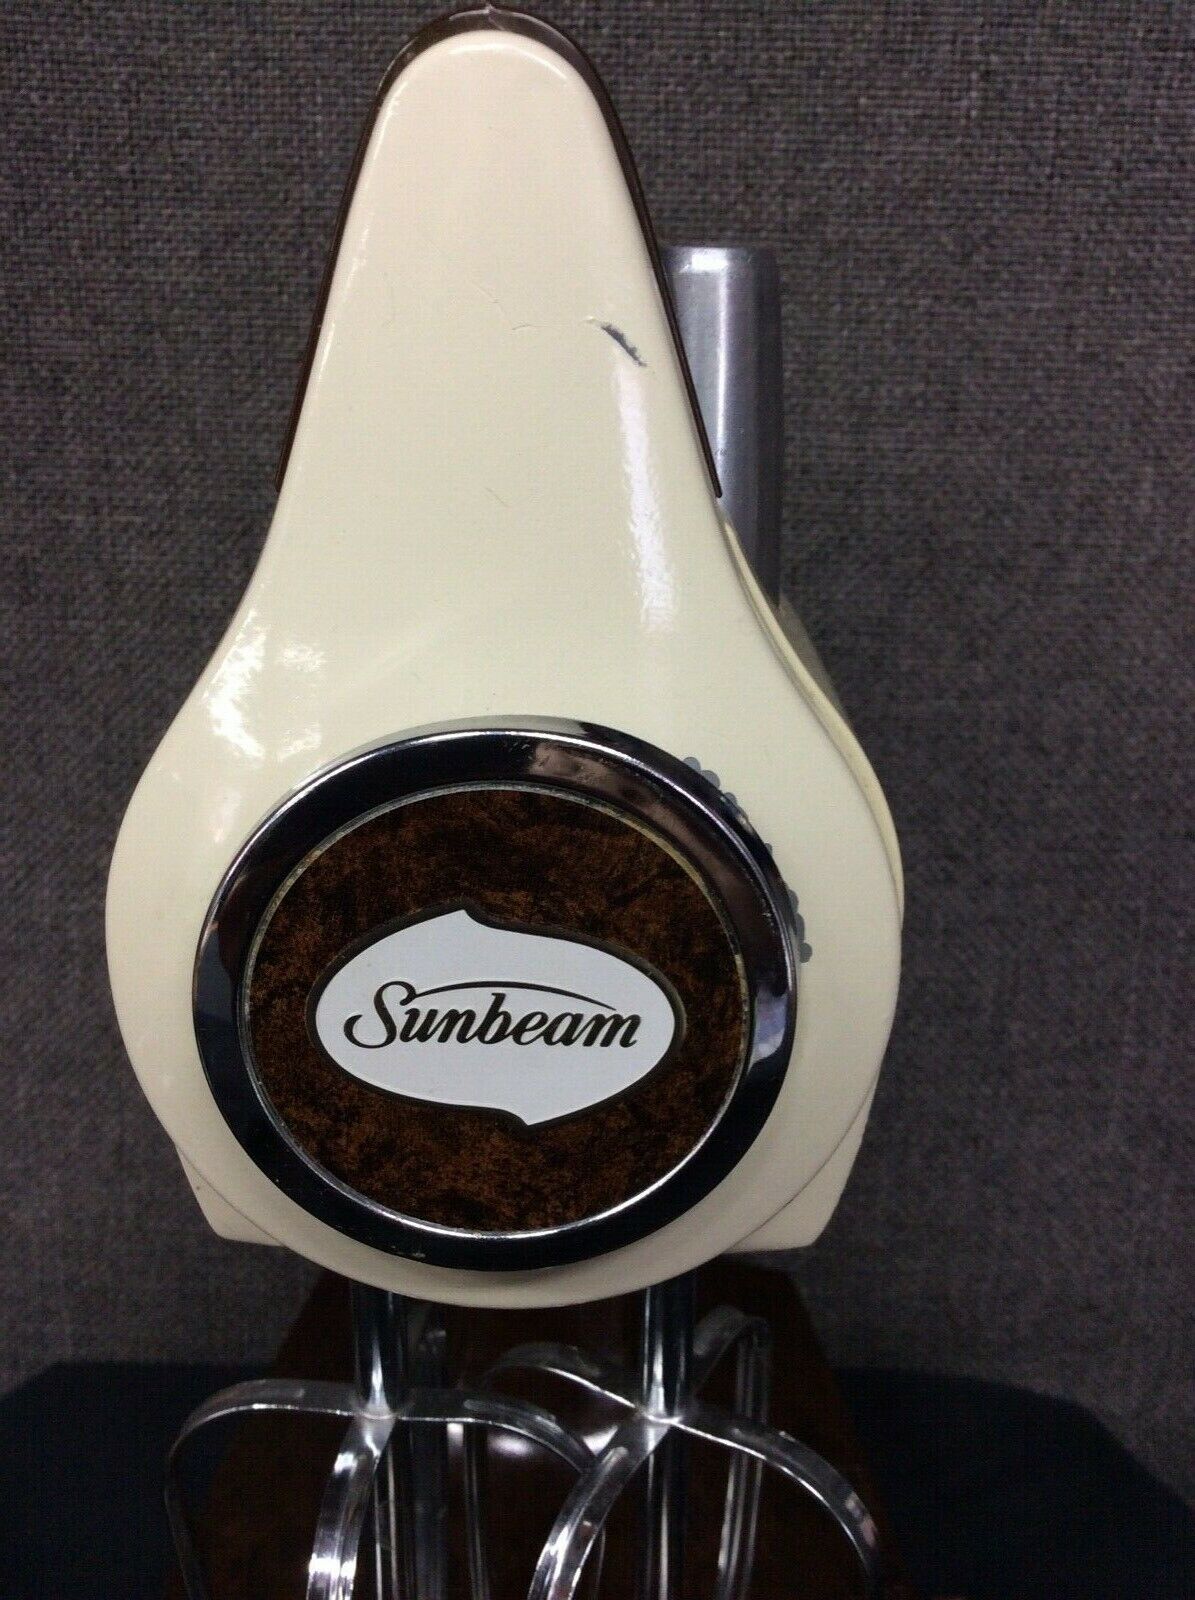 Vintage Sunbeam Mixmaster 12 Speed Stand Mixer w/Bowl Beaters Cord  Tan/Brown - Mixers & Blenders